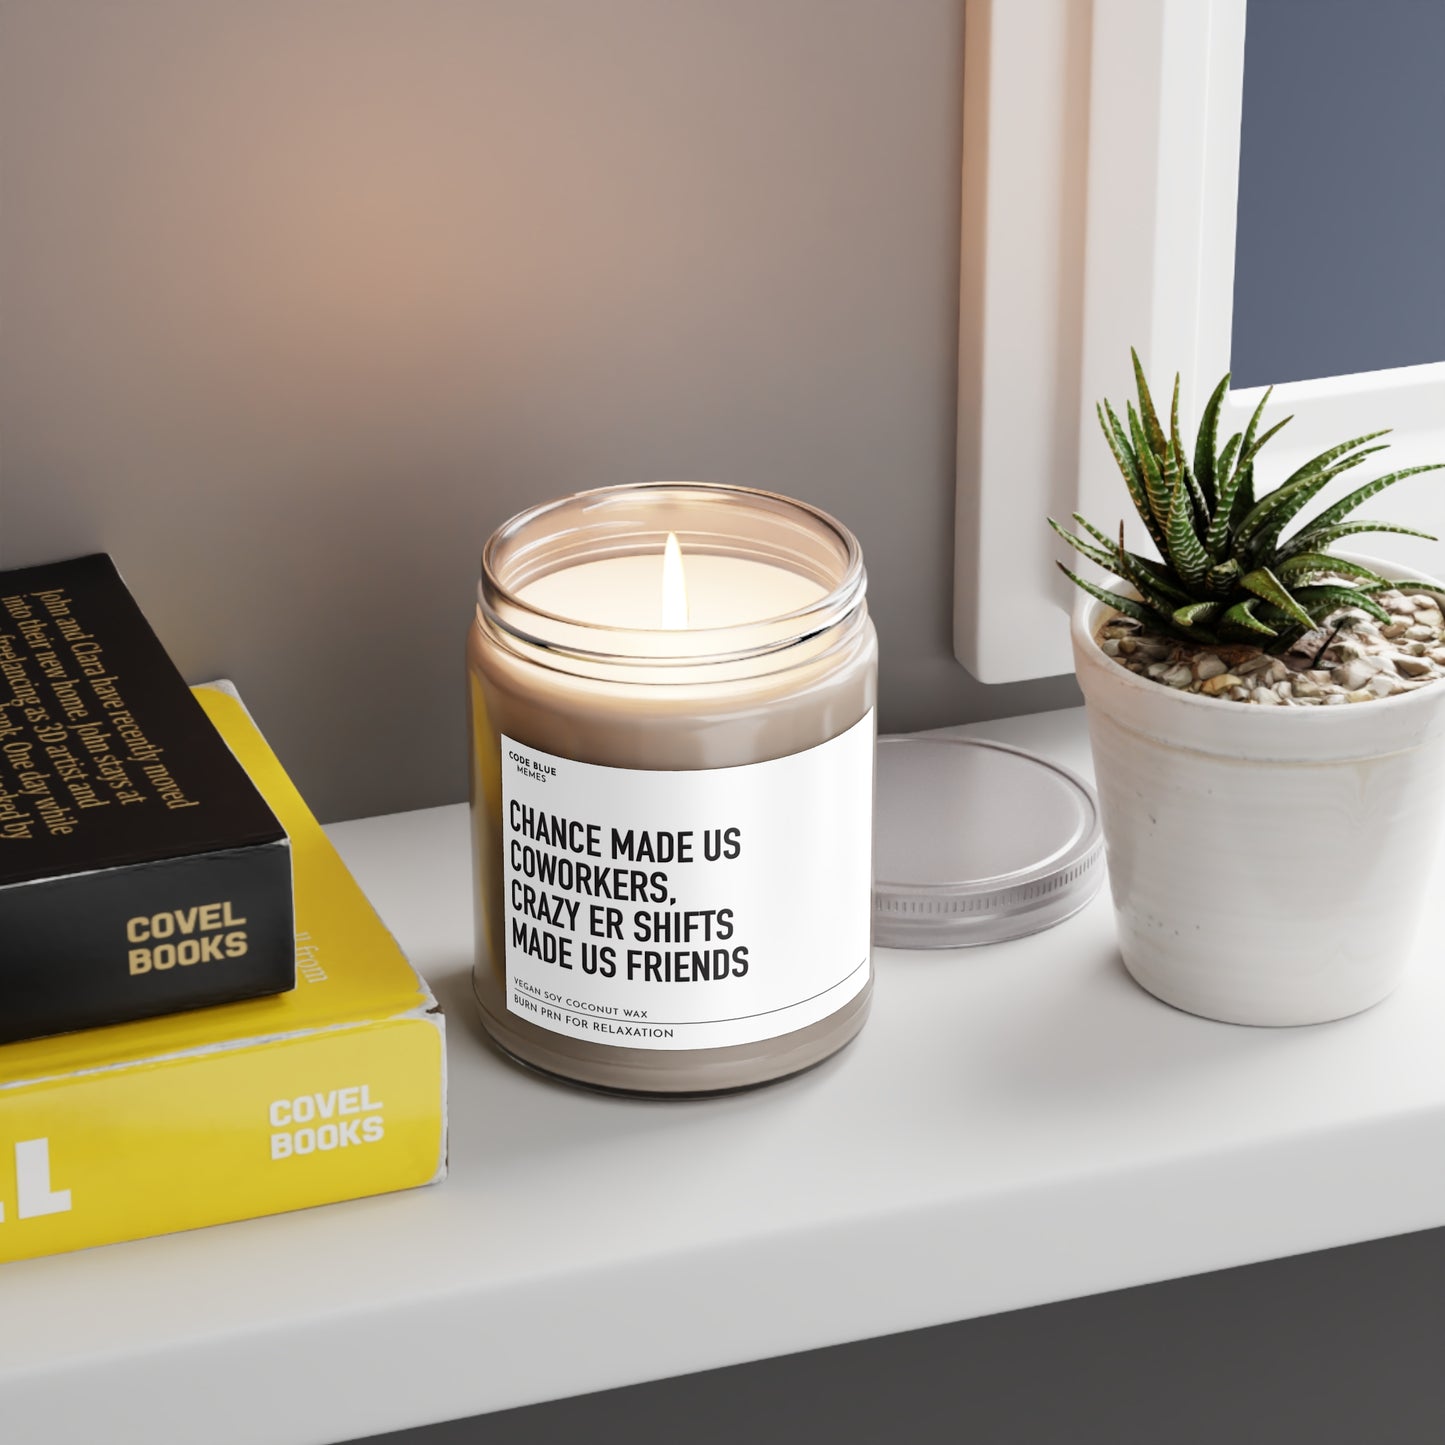 Chance Made Us Coworkers, Crazy ER Shifts Made Us Friends - Scented Candle